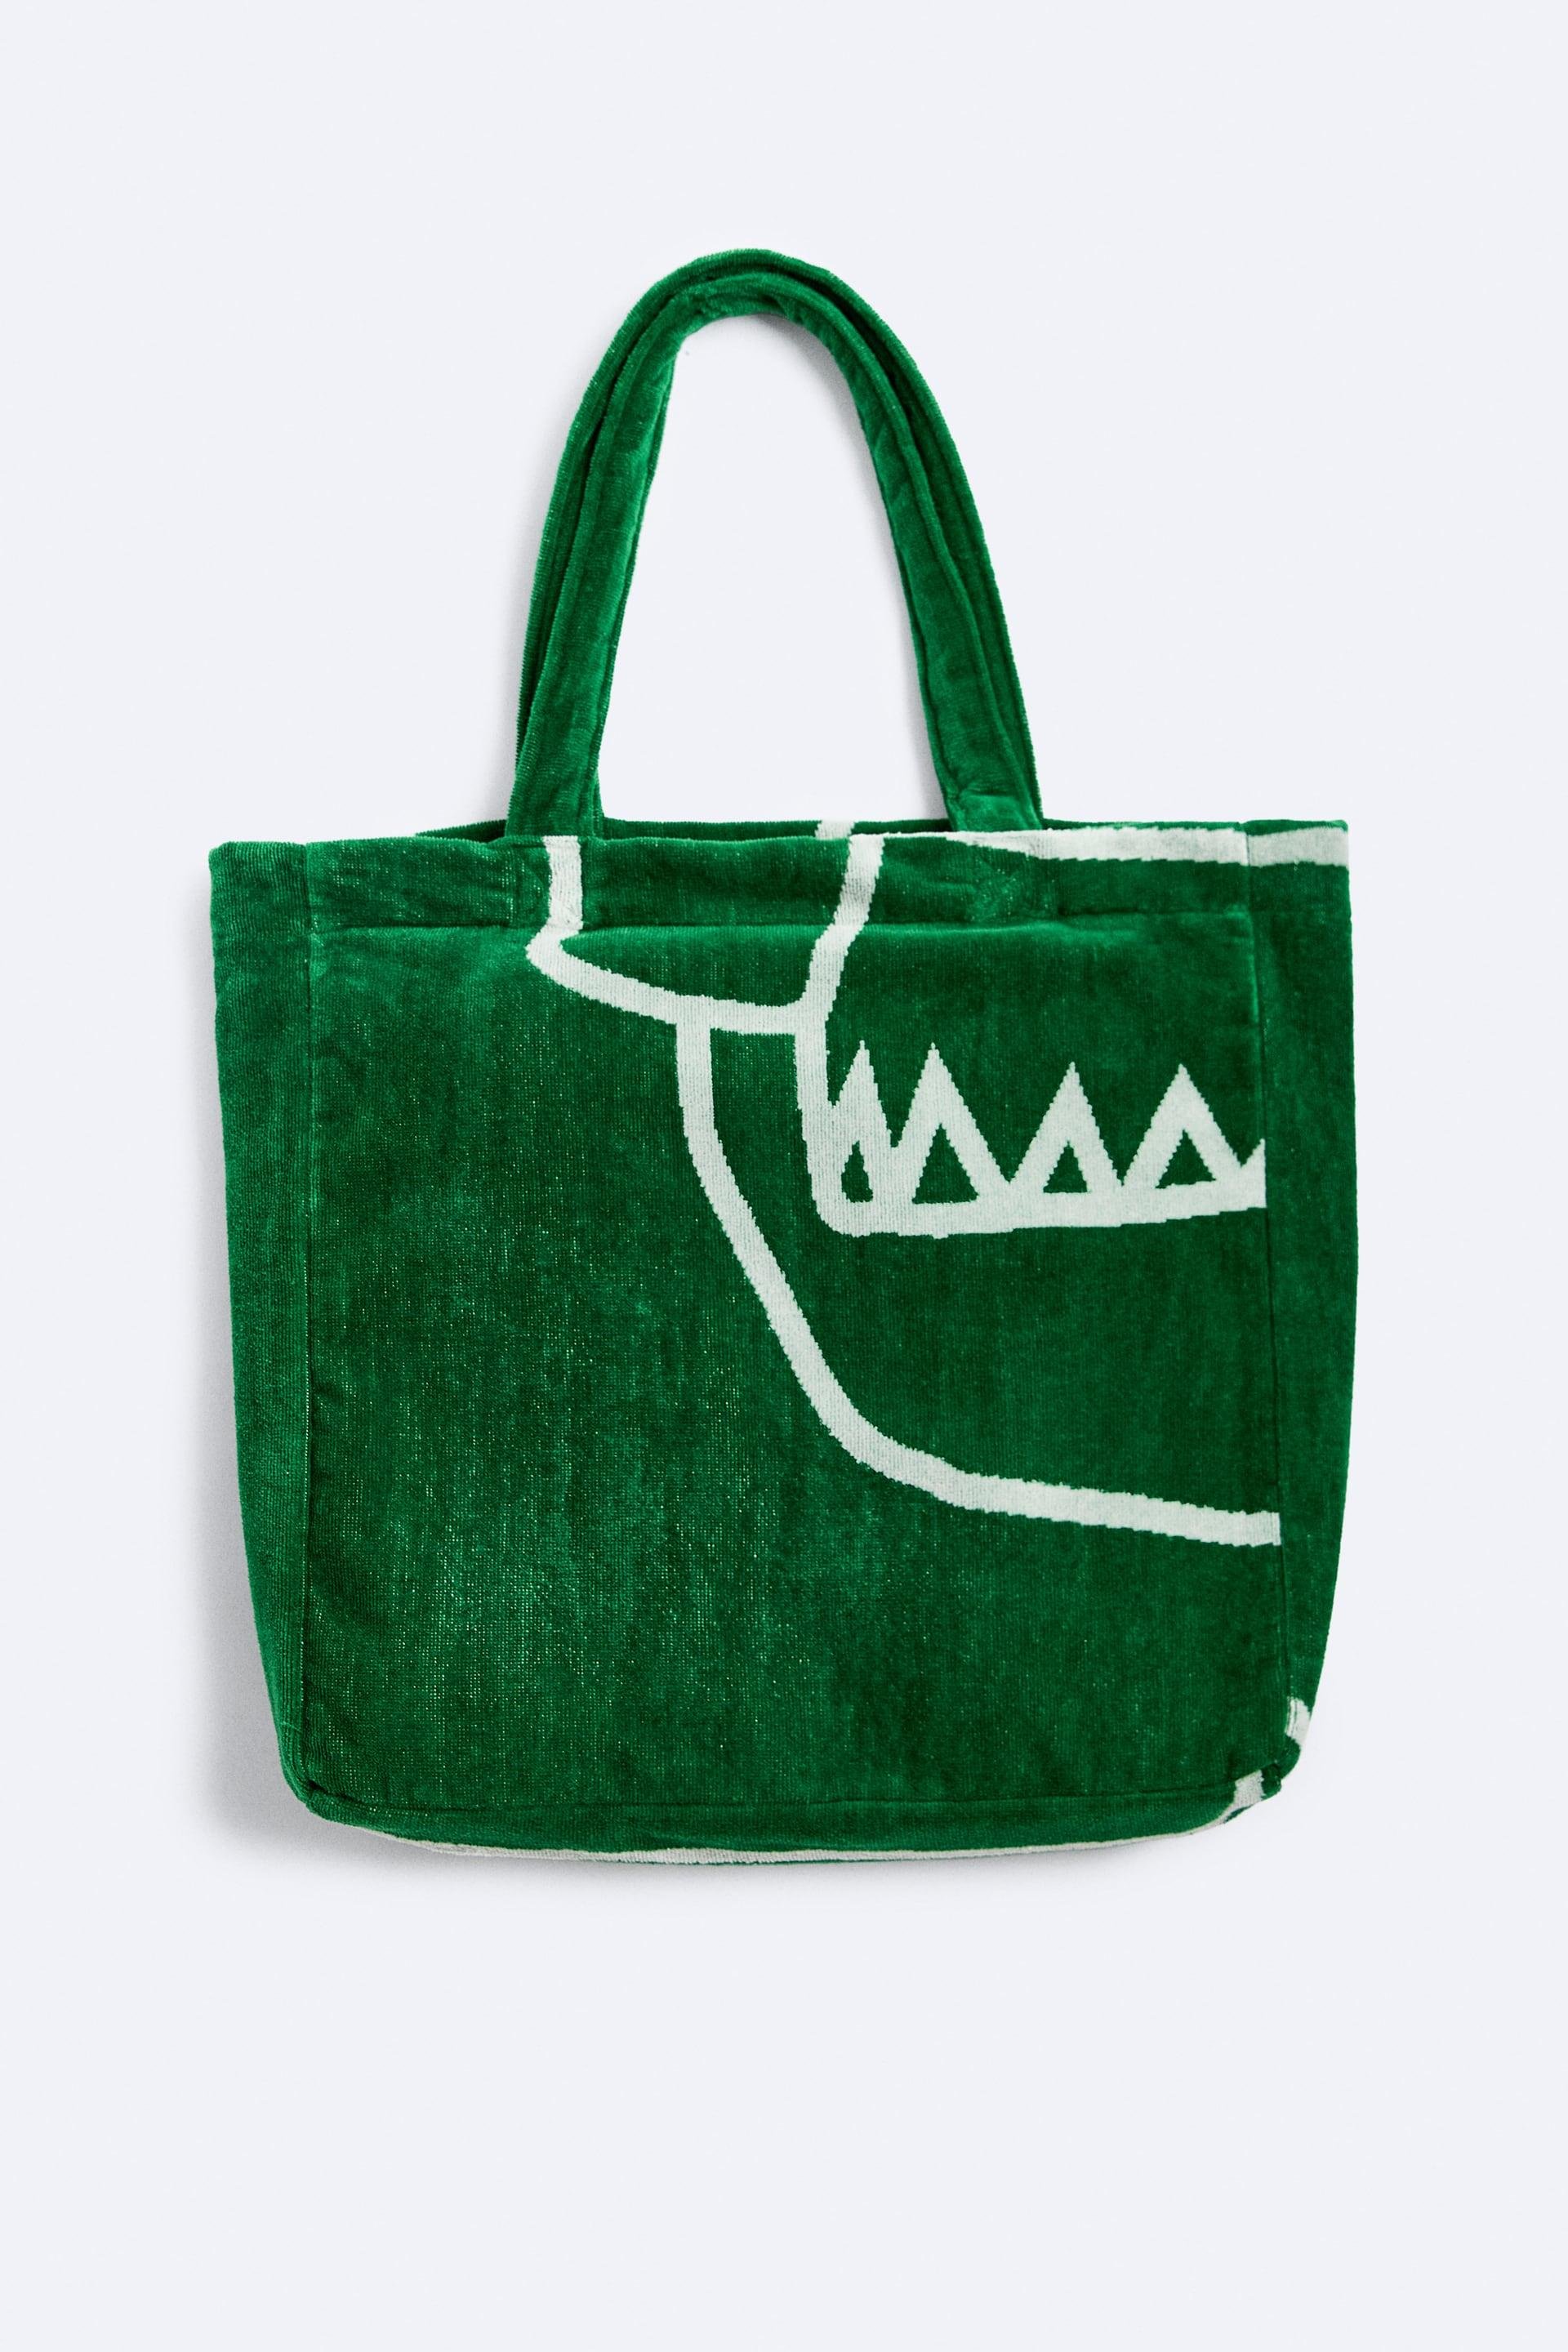 GRAPHIC TOTE + TOWEL PACK by ZARA